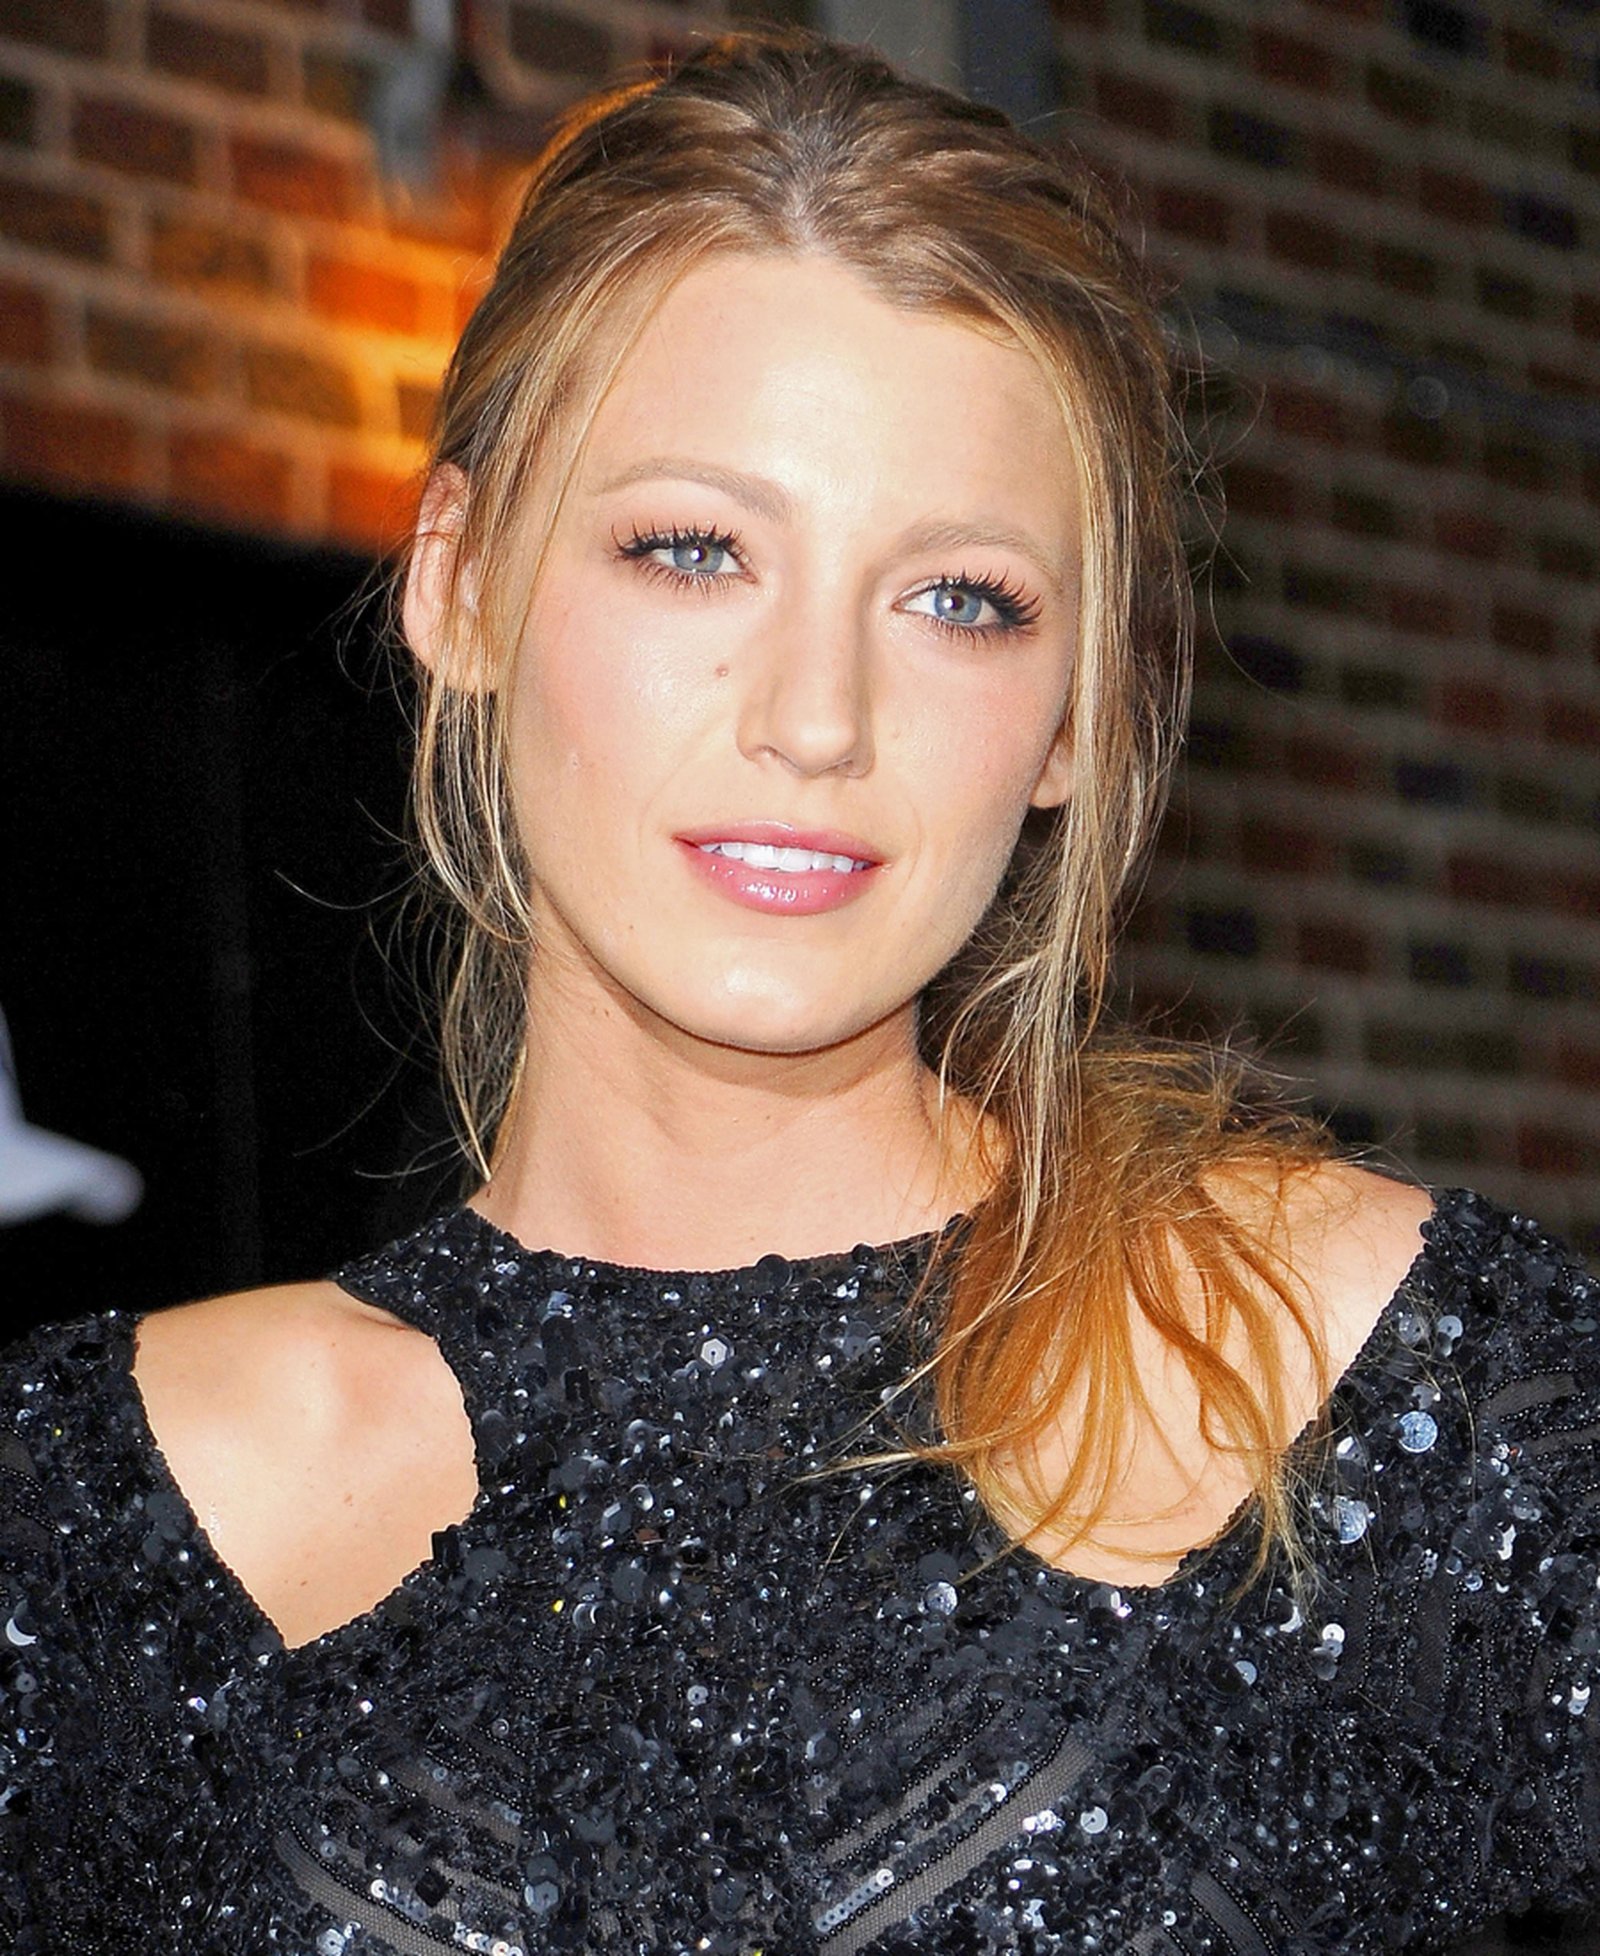 Blake Lively confirmed as new face of Chanel